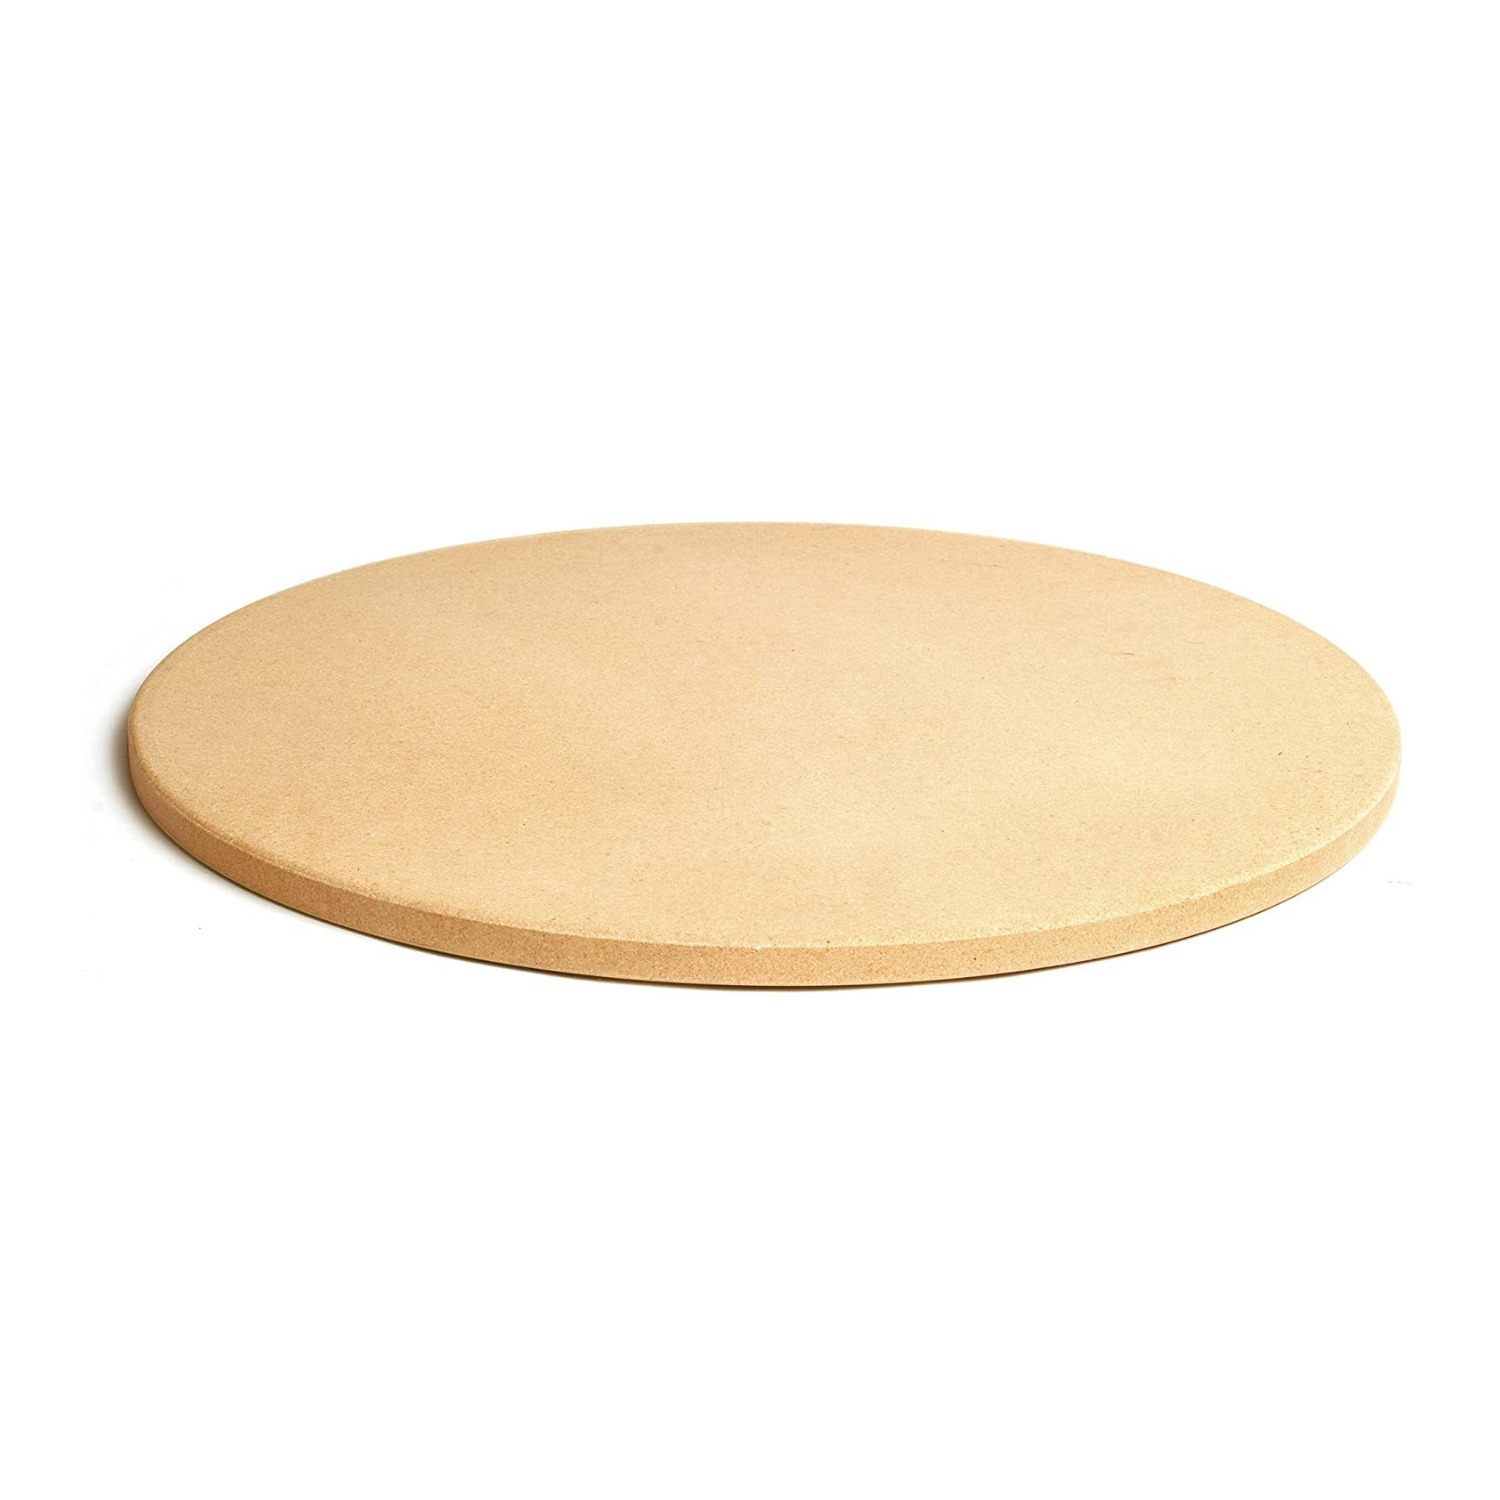 Pizzacraft 16.5-Inch Round Thermabond Baking/Pizza Stone with Folding Peel and Stone Brush - image 3 of 5